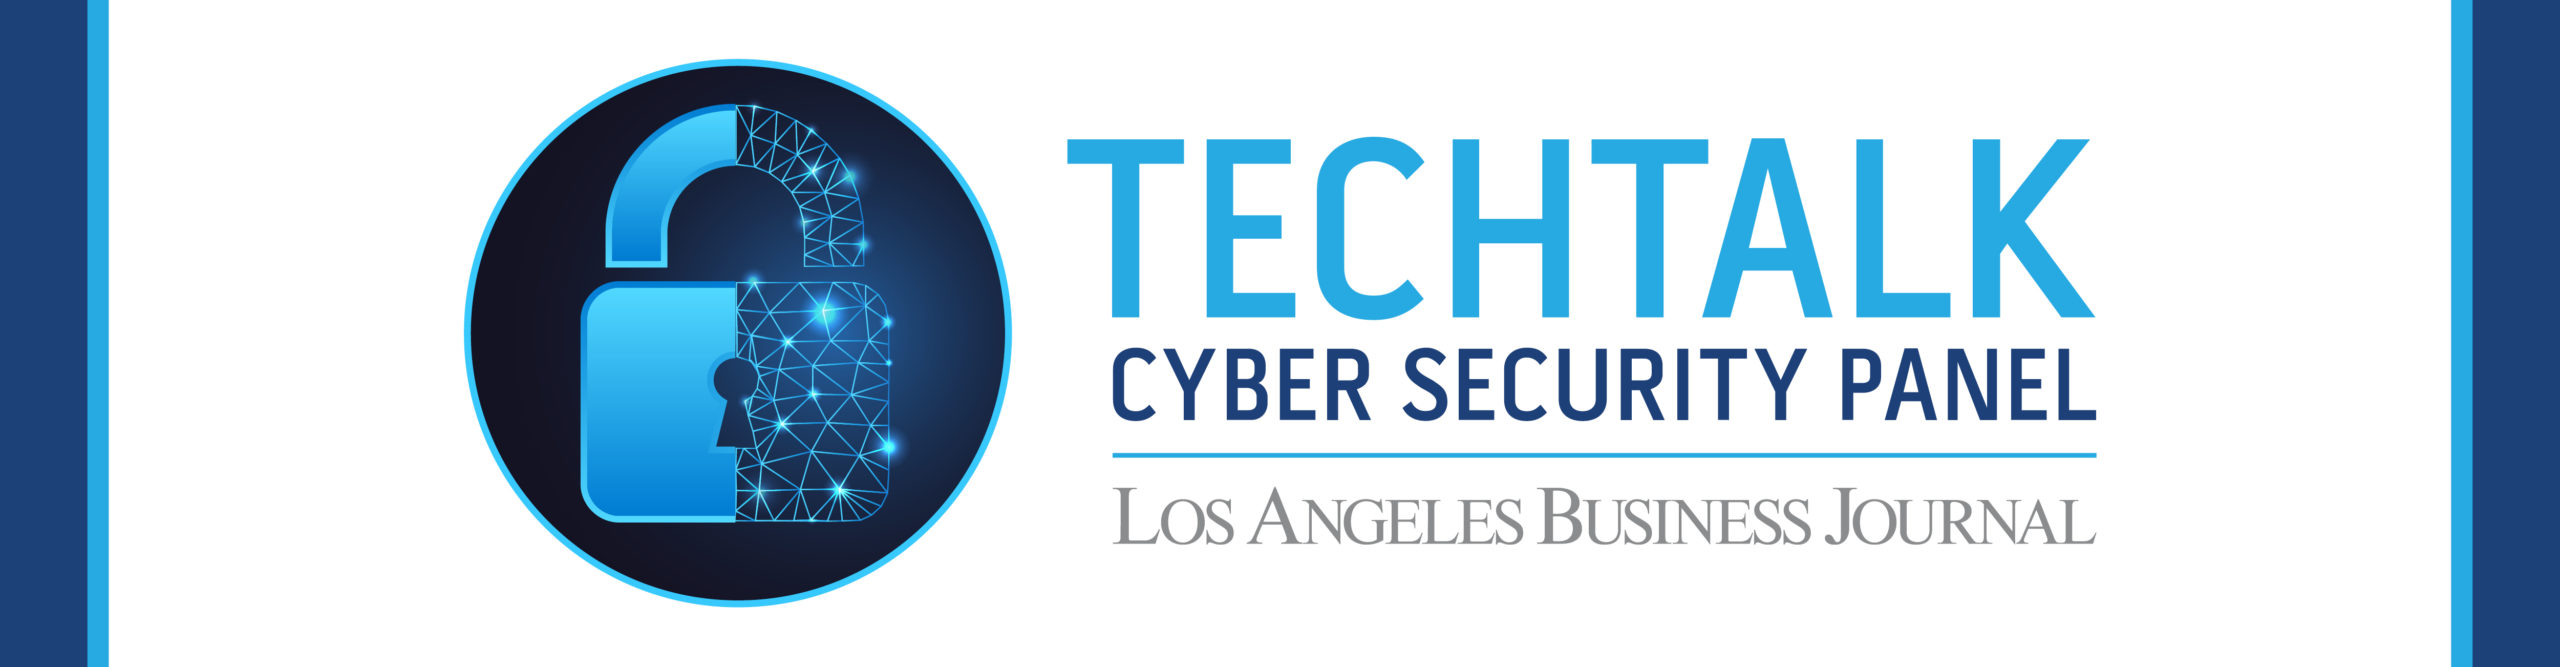 Los Angeles Business Journal TechTalk Cyber Security Event Banner